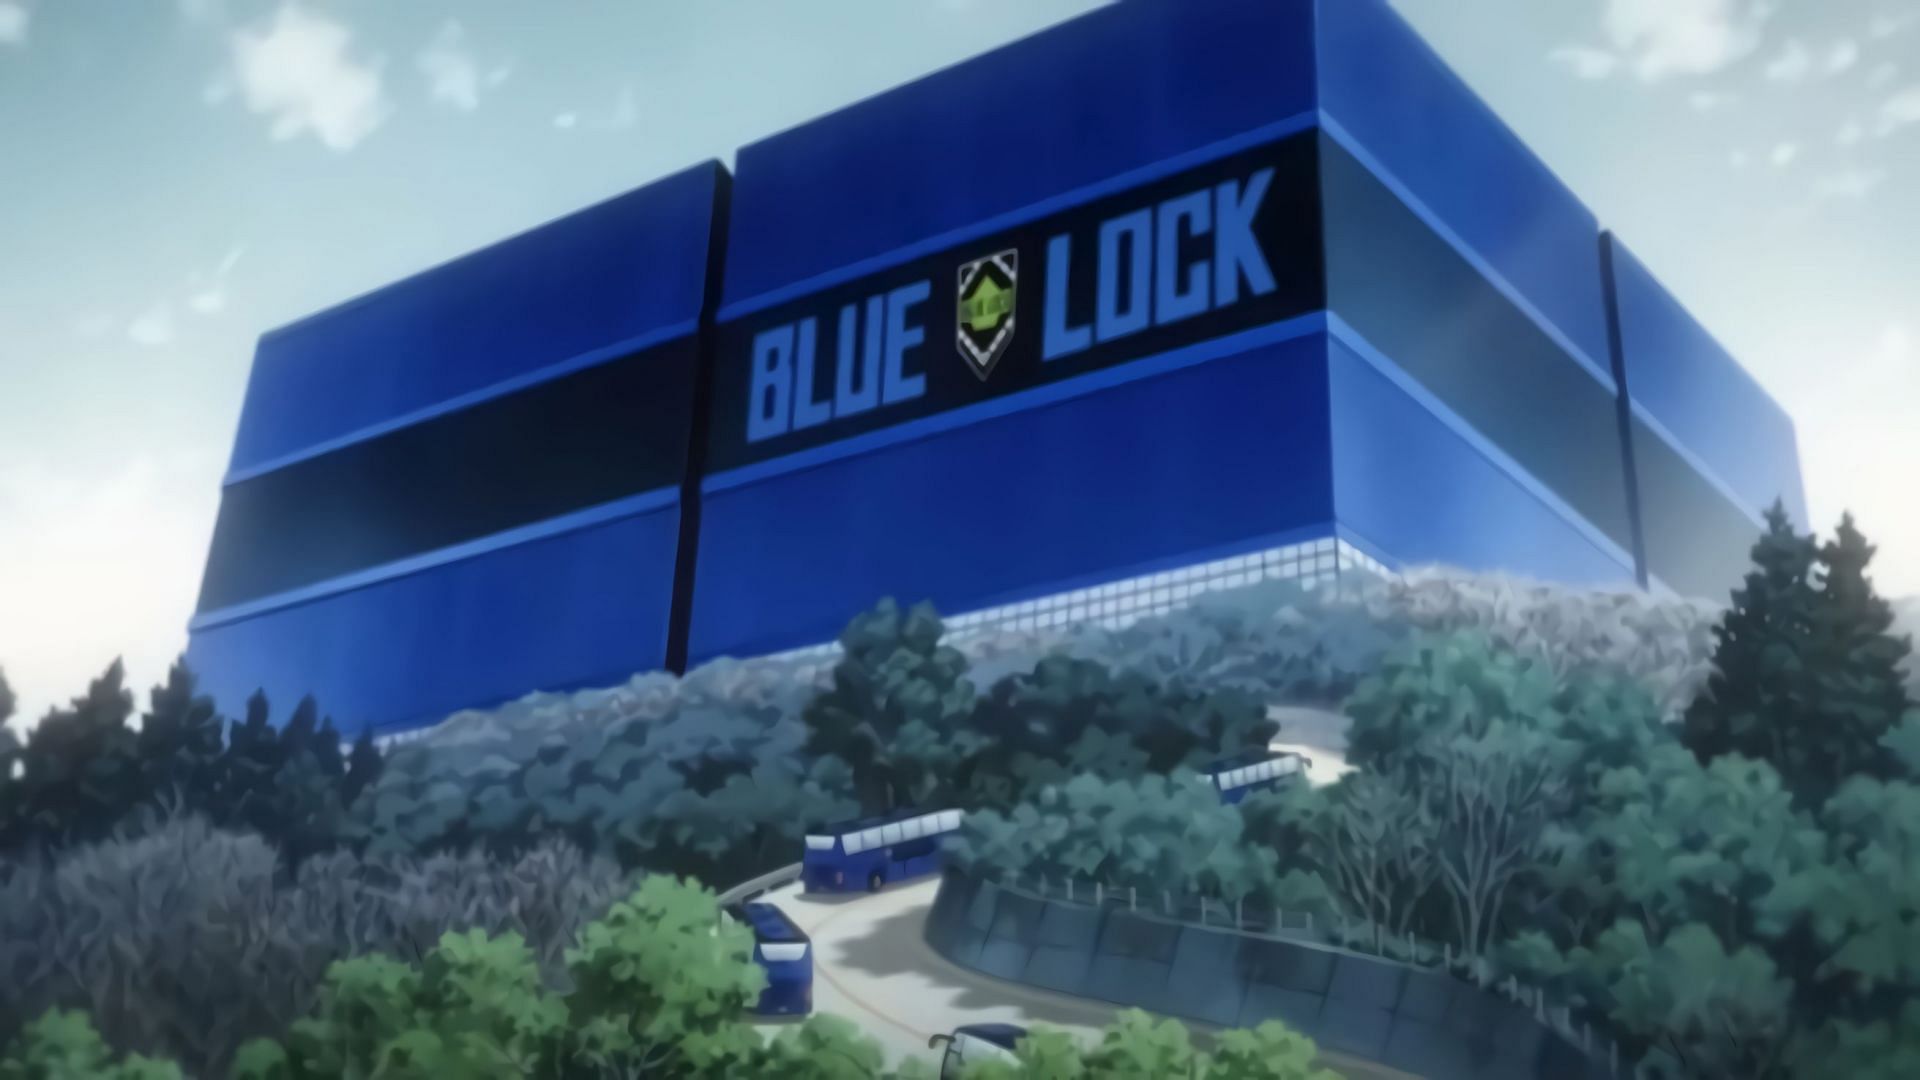 Blue Lock: The Blue Lock project, explained